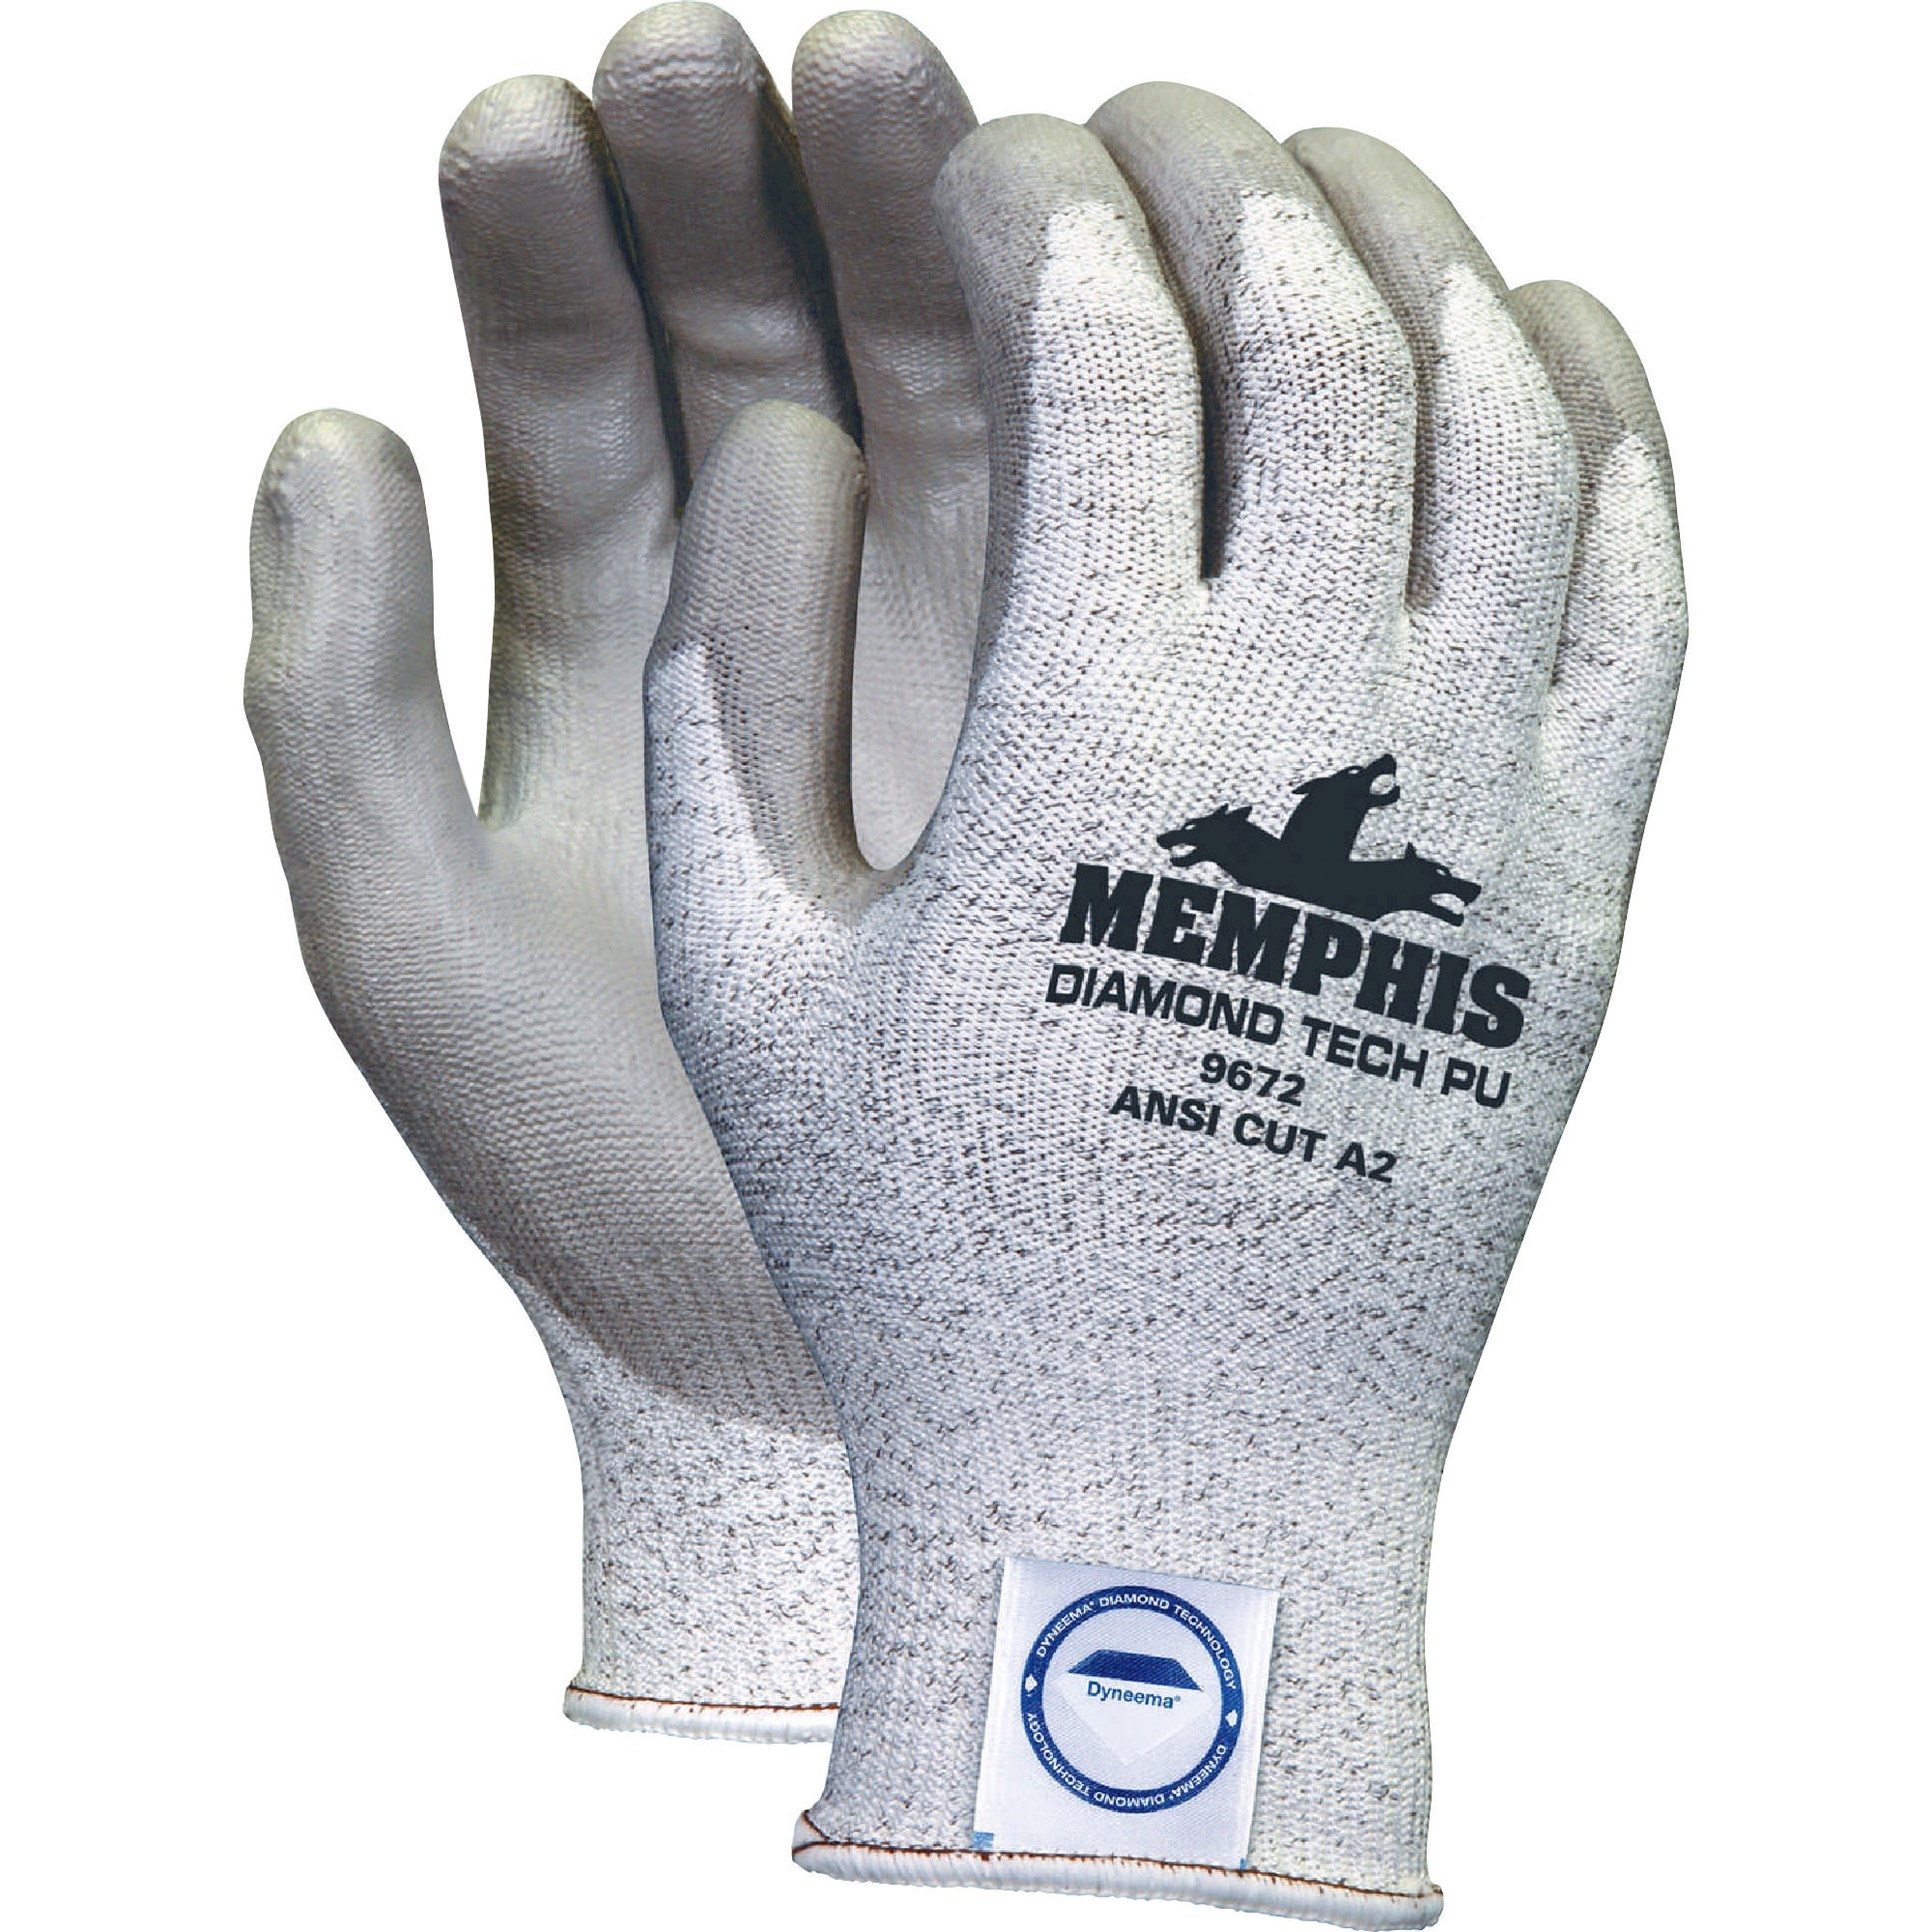 Memphis, MCSCRW9672XL, Dyneema Dipped Safety Gloves, 2 / Pair, Gray - image 2 of 2